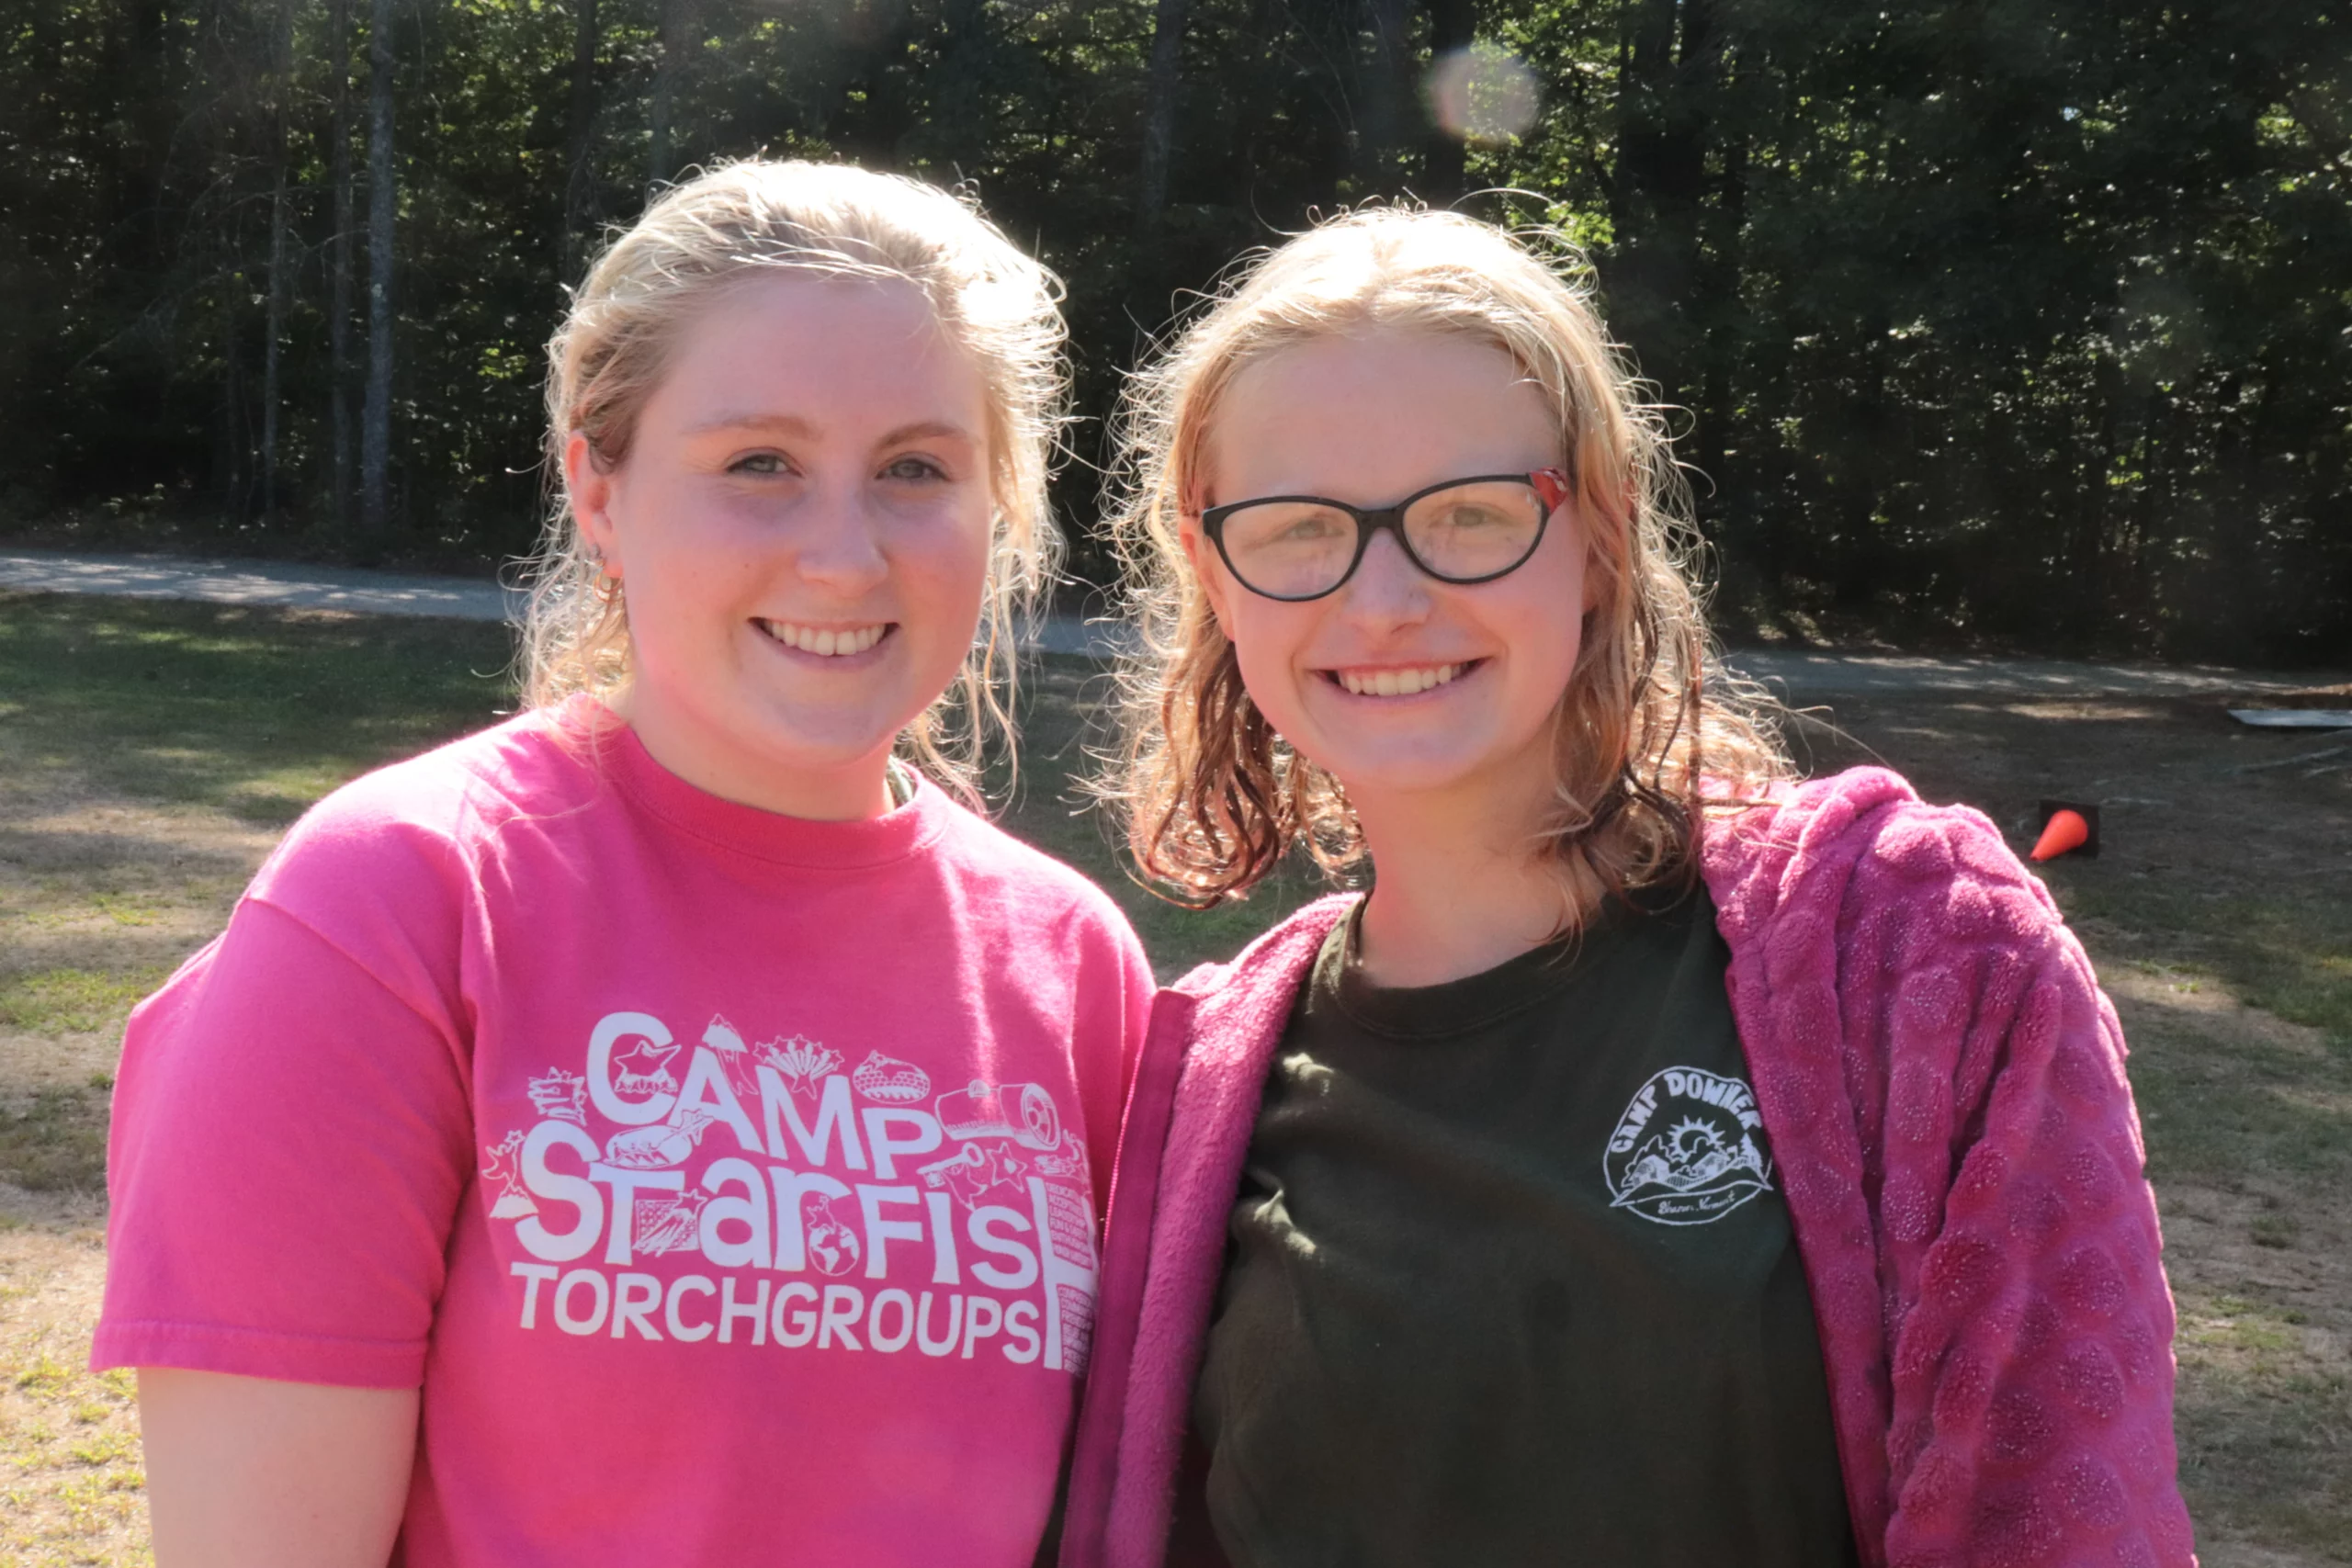 Camp Counselor and smiling camper teen at Camp Starfish